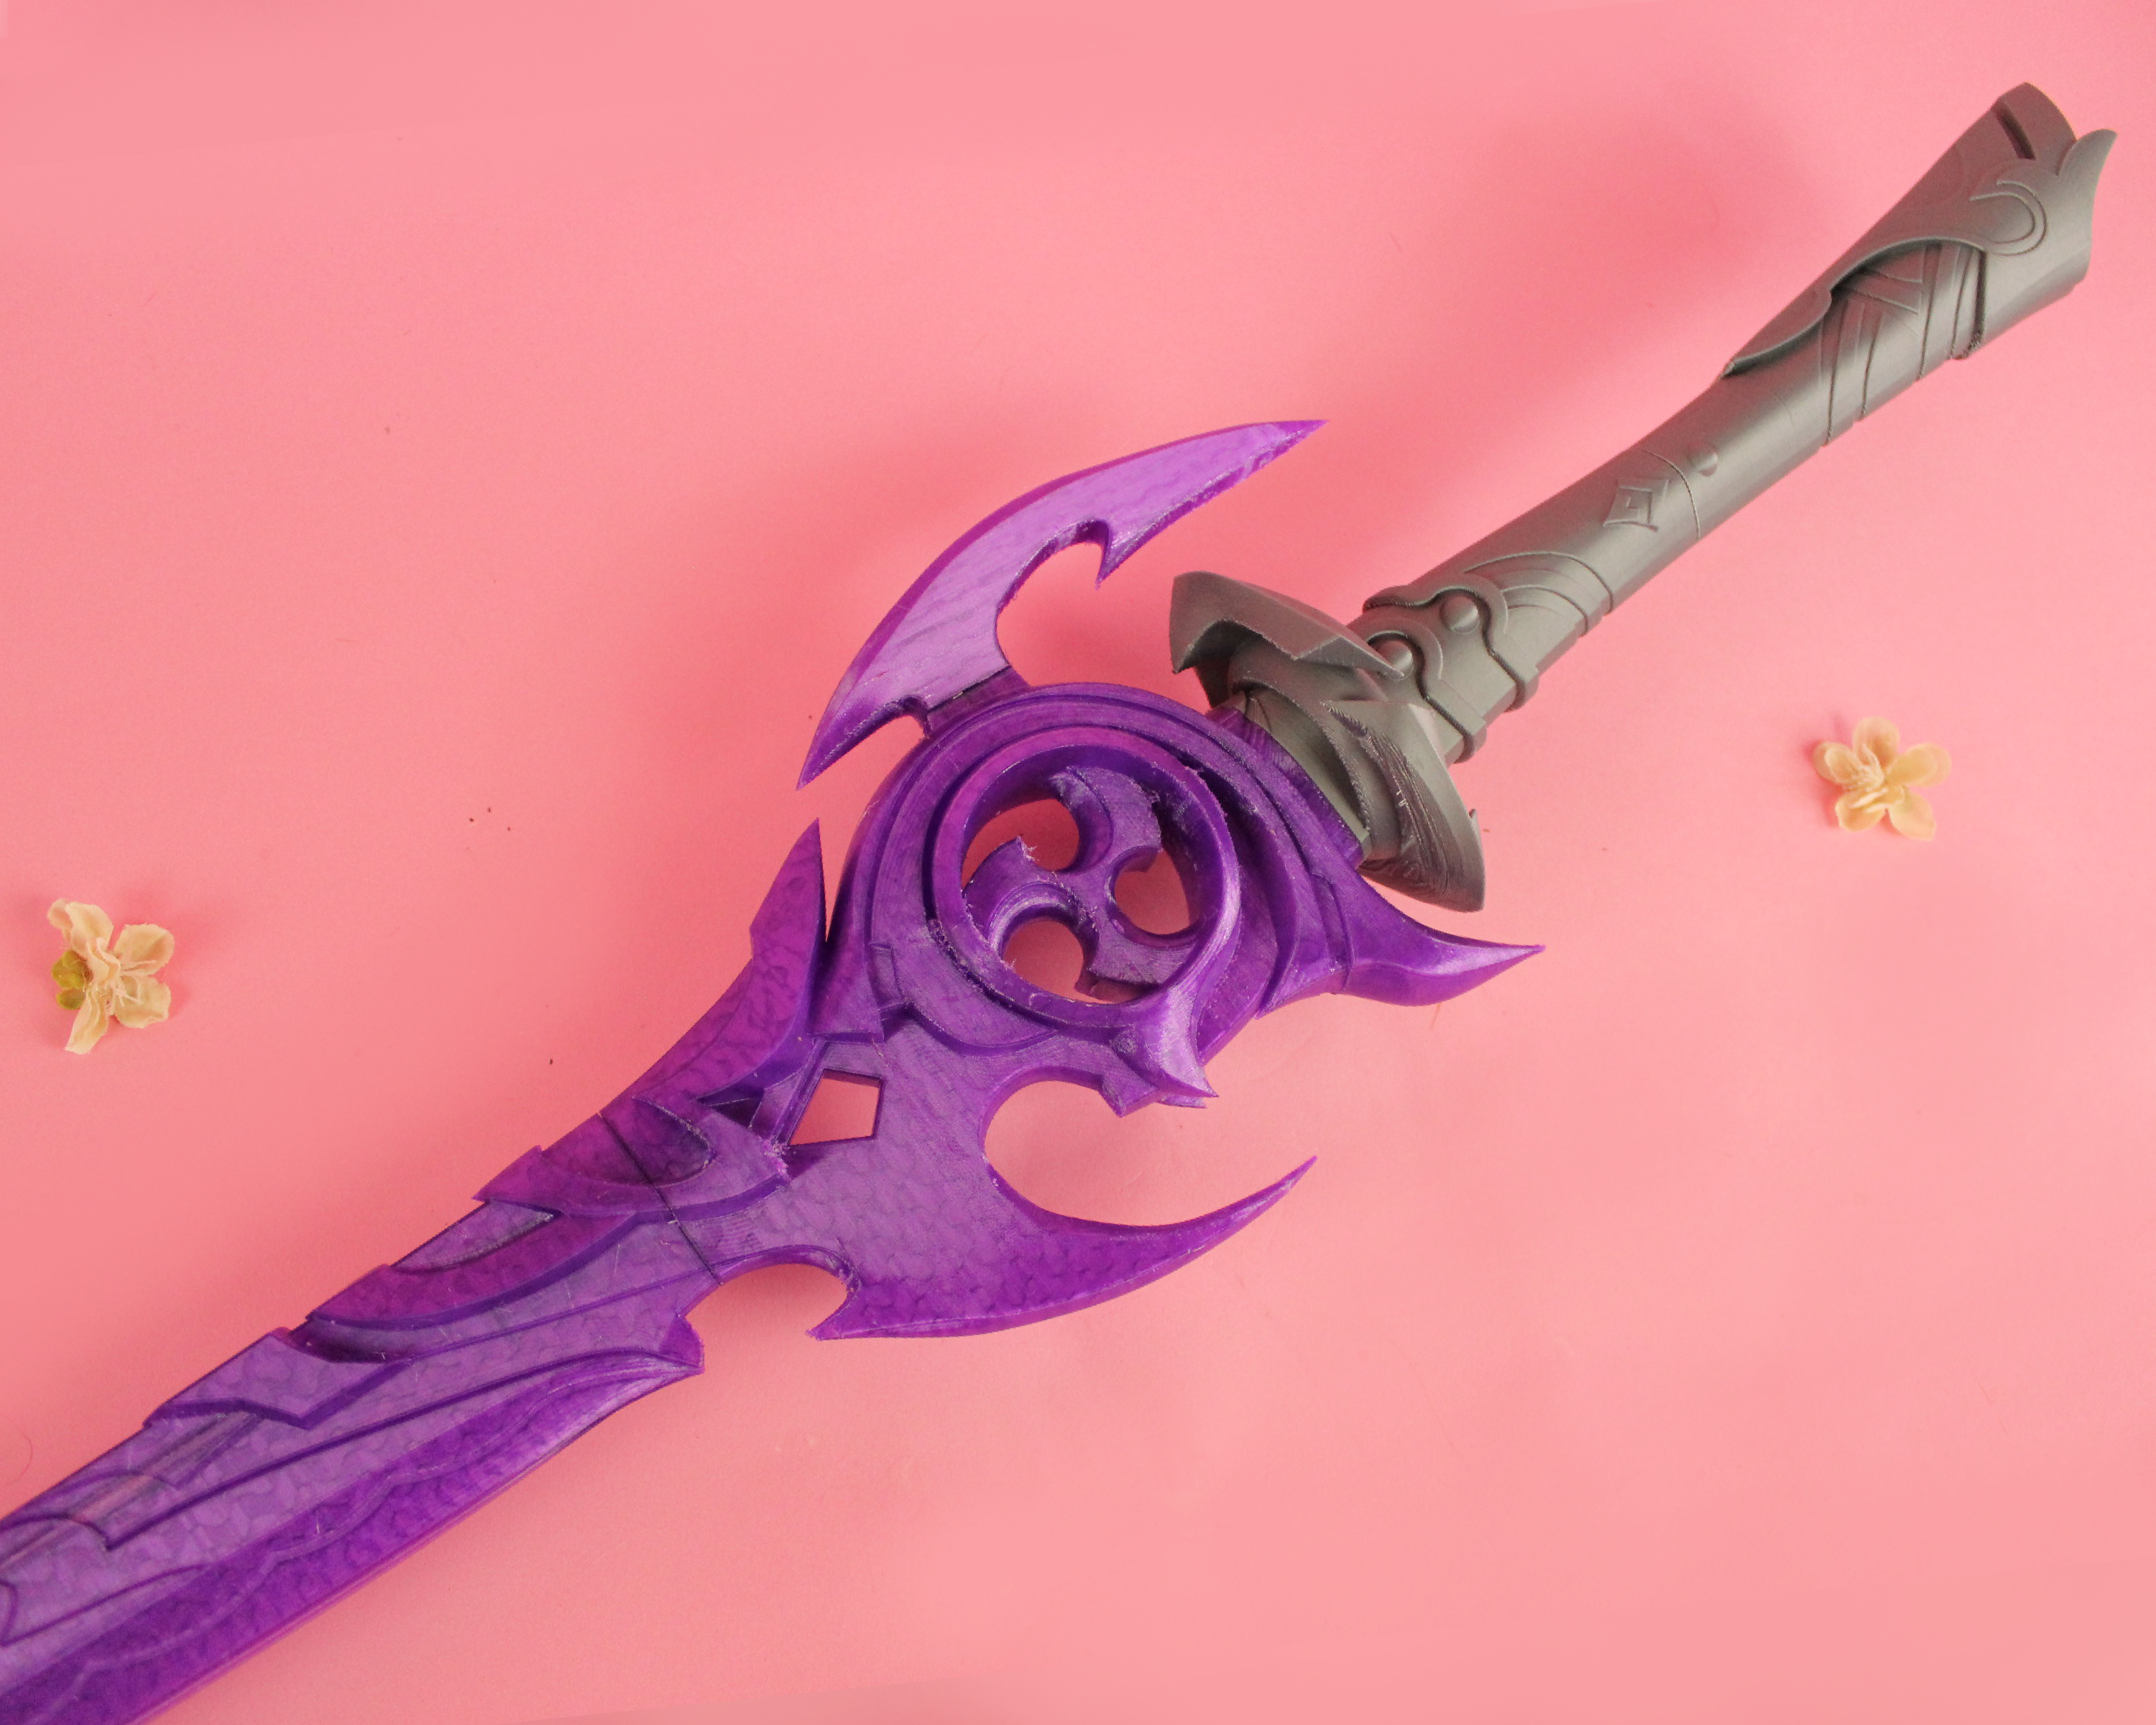 Electroplated 3D Printed Sword: Shiny!